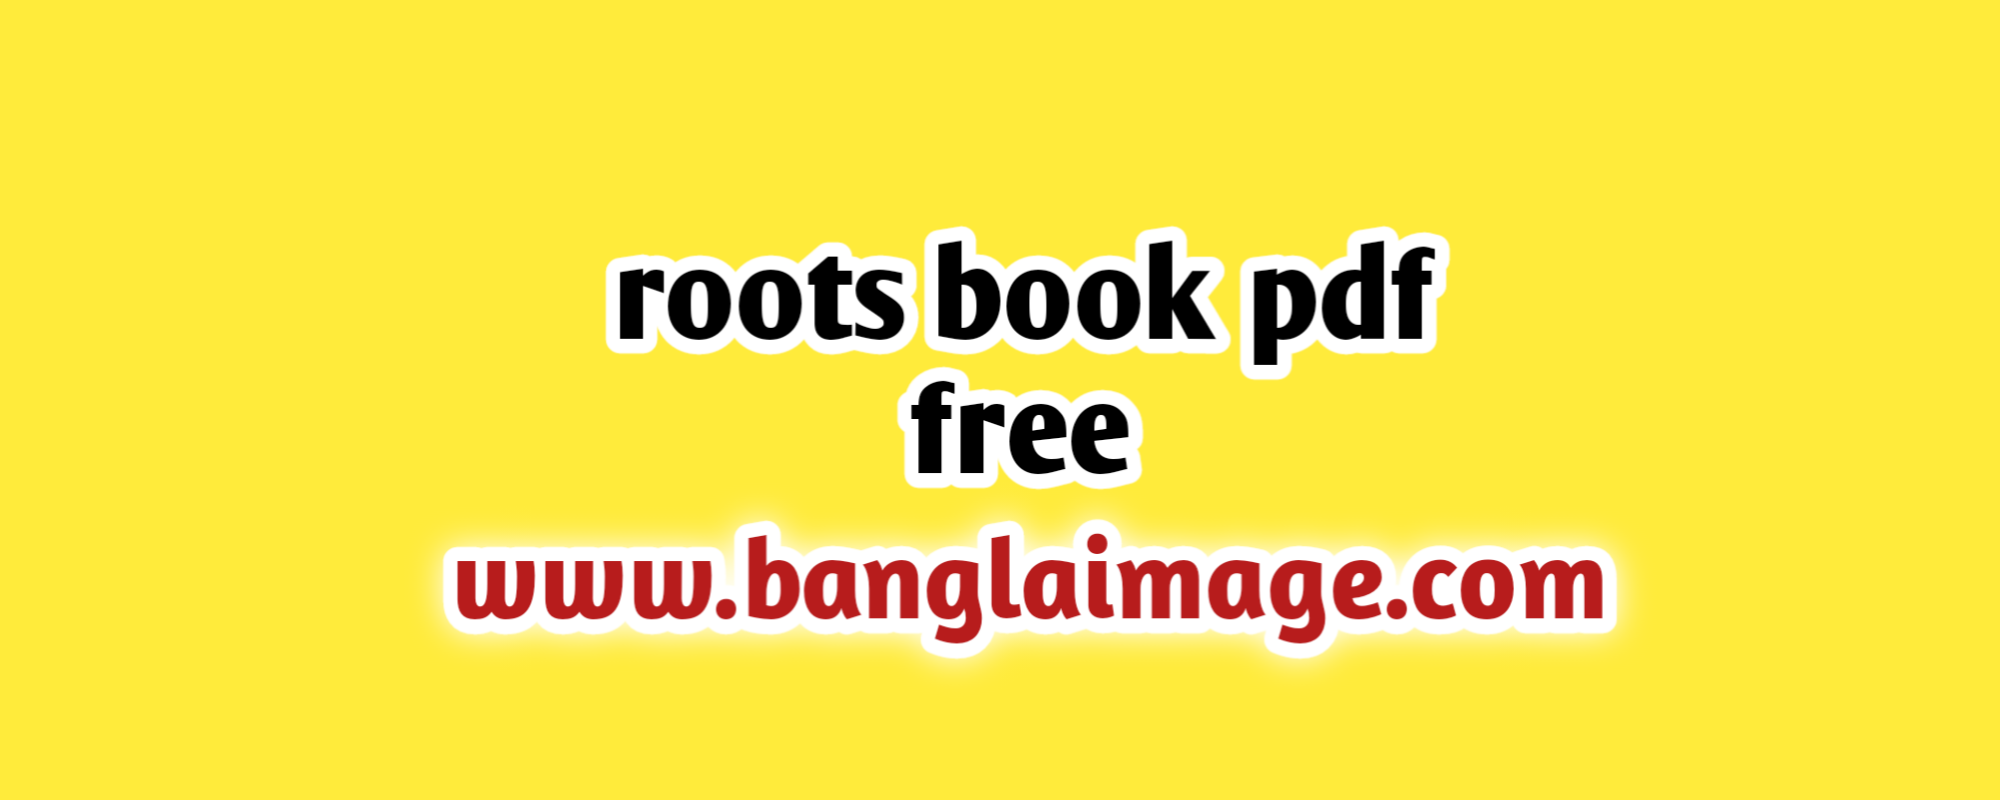 roots book pdf free, roots book online , roots ebook, roots book pdf